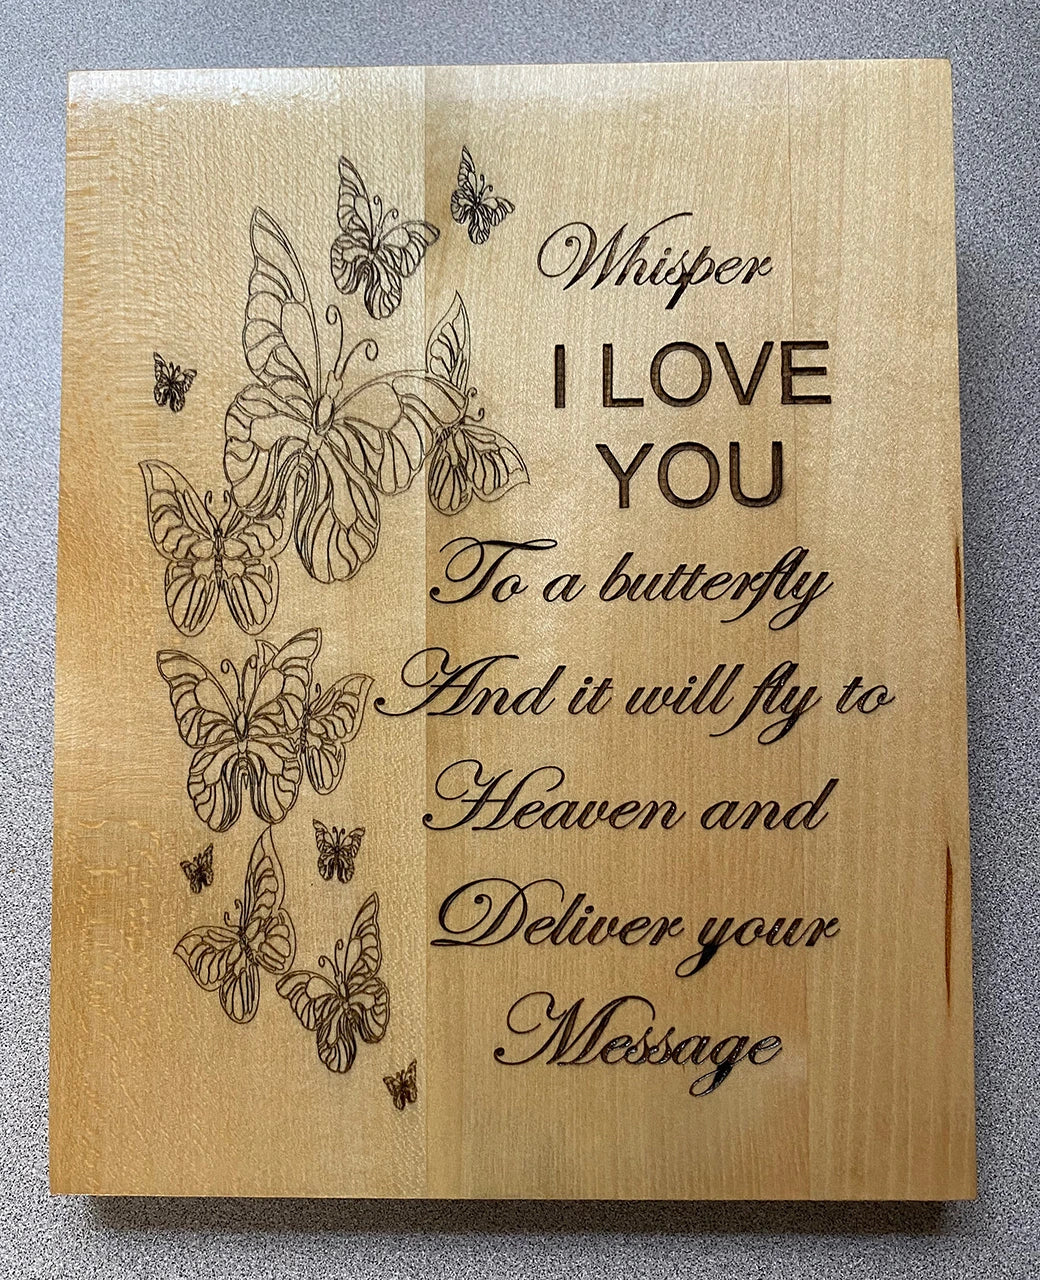 "Whisper I Love You" Butterfly Sign - Clean Edge